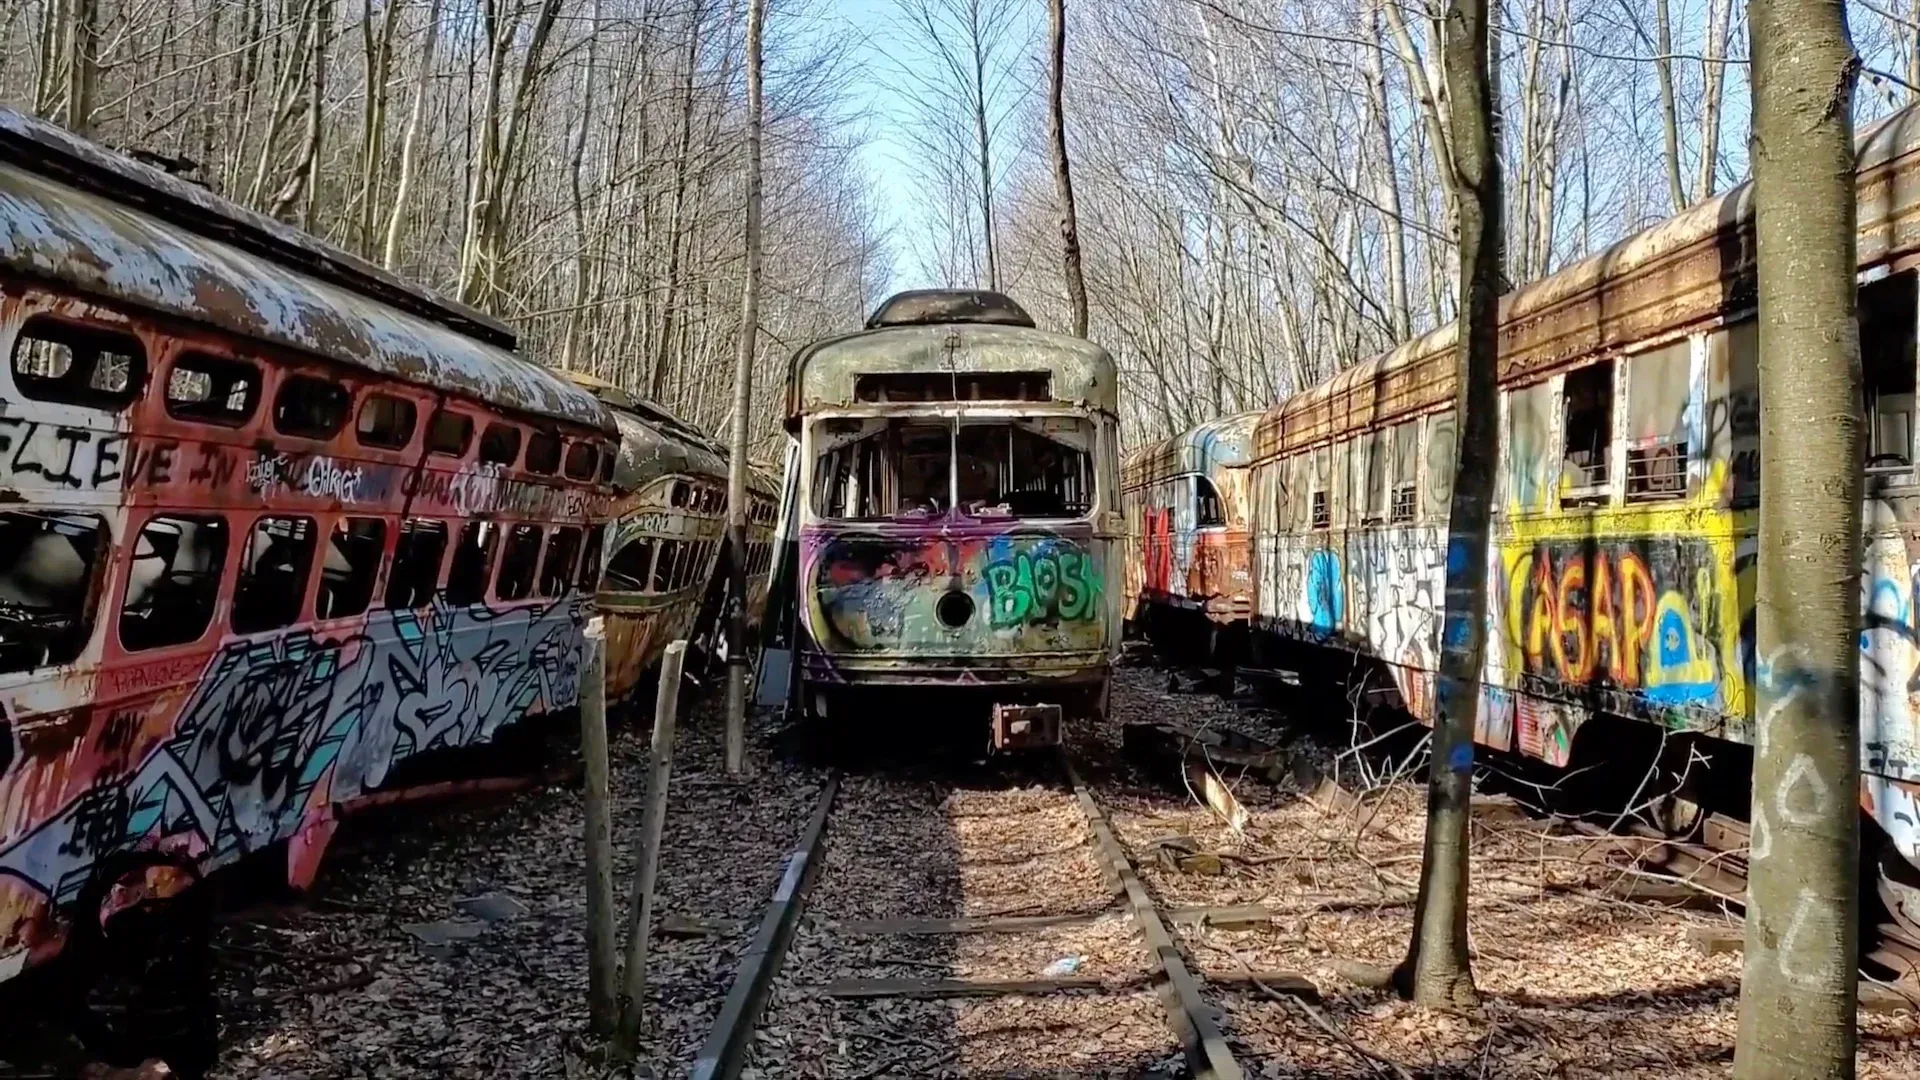 This Pennsylvania trolley graveyard that has been abandoned is horrifyingly eerie.